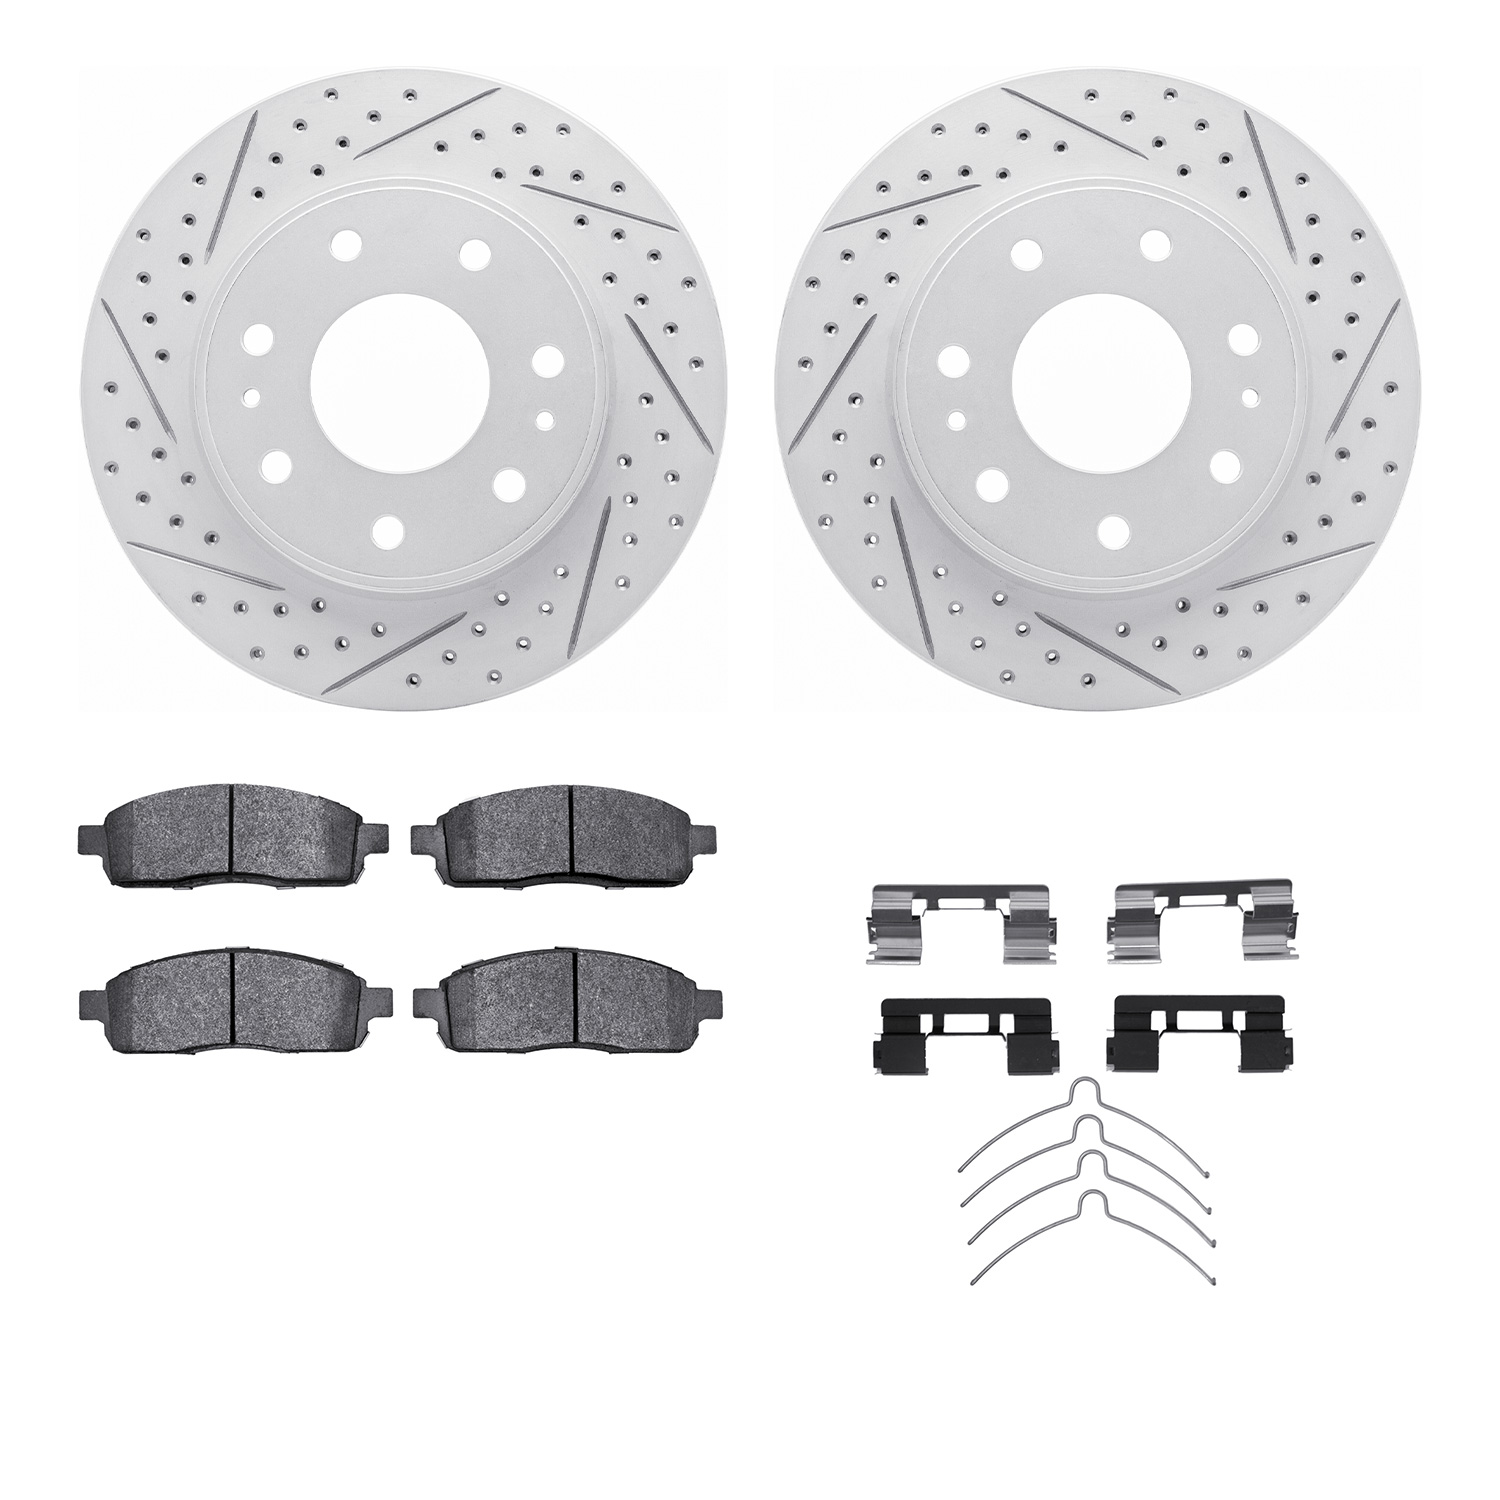 2212-99177 Geoperformance Drilled/Slotted Rotors w/Heavy-Duty Pads Kit & Hardware, 2009-2009 Ford/Lincoln/Mercury/Mazda, Positio